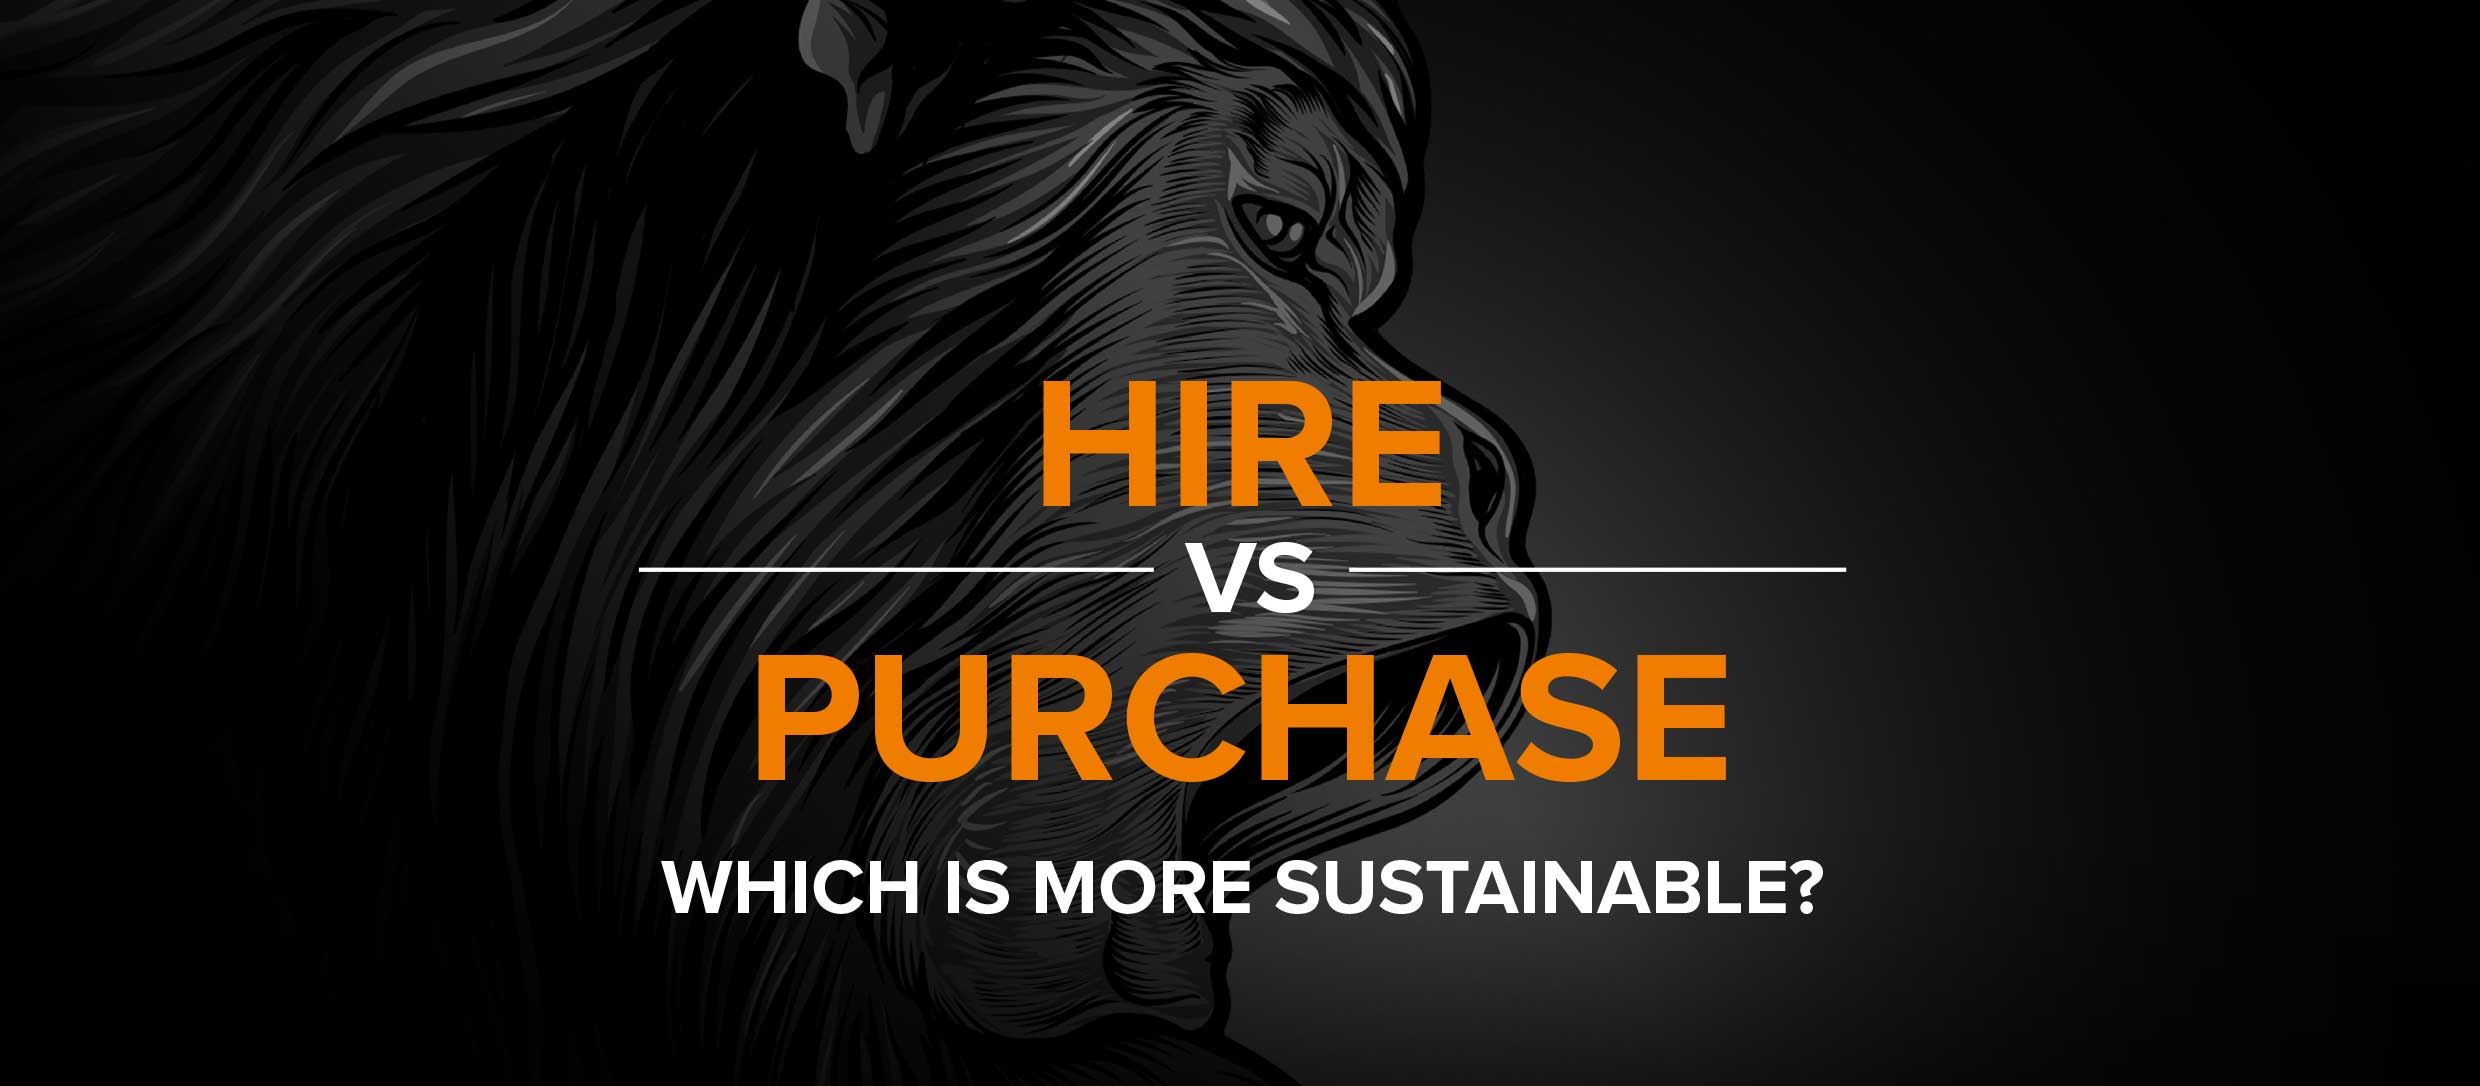 hire vs purchase banner